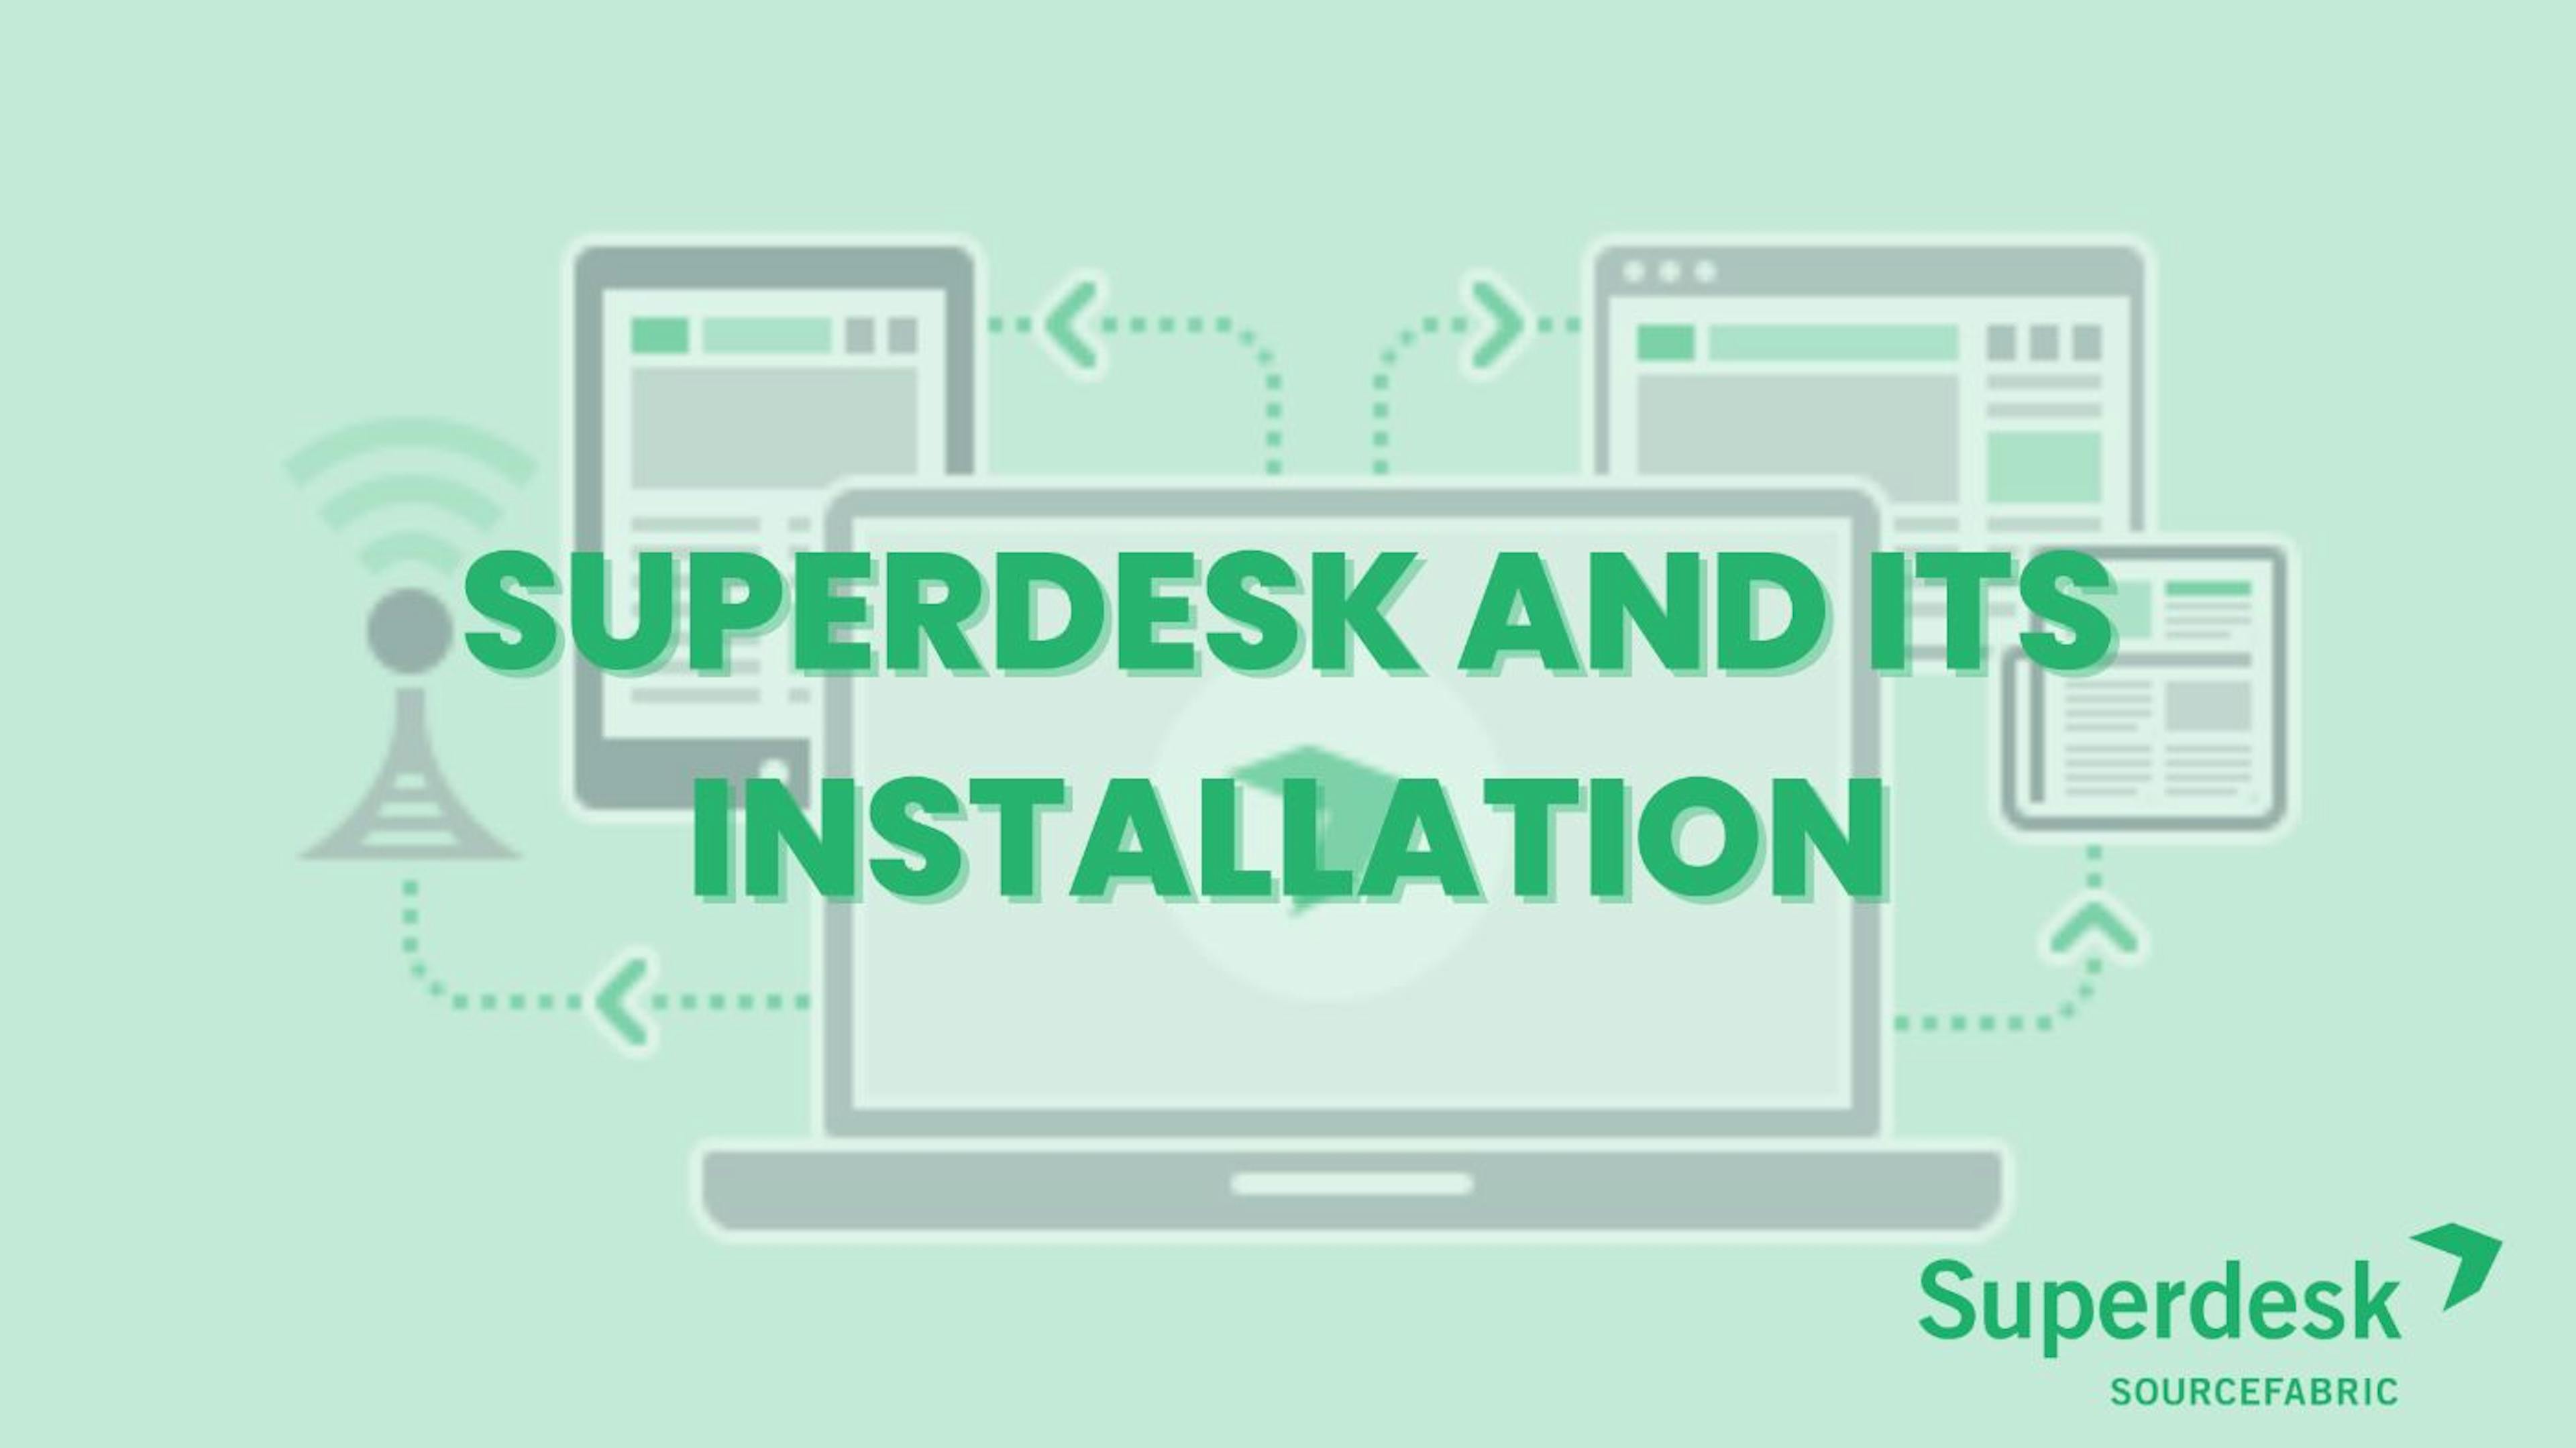 /superdesk-and-its-installation feature image